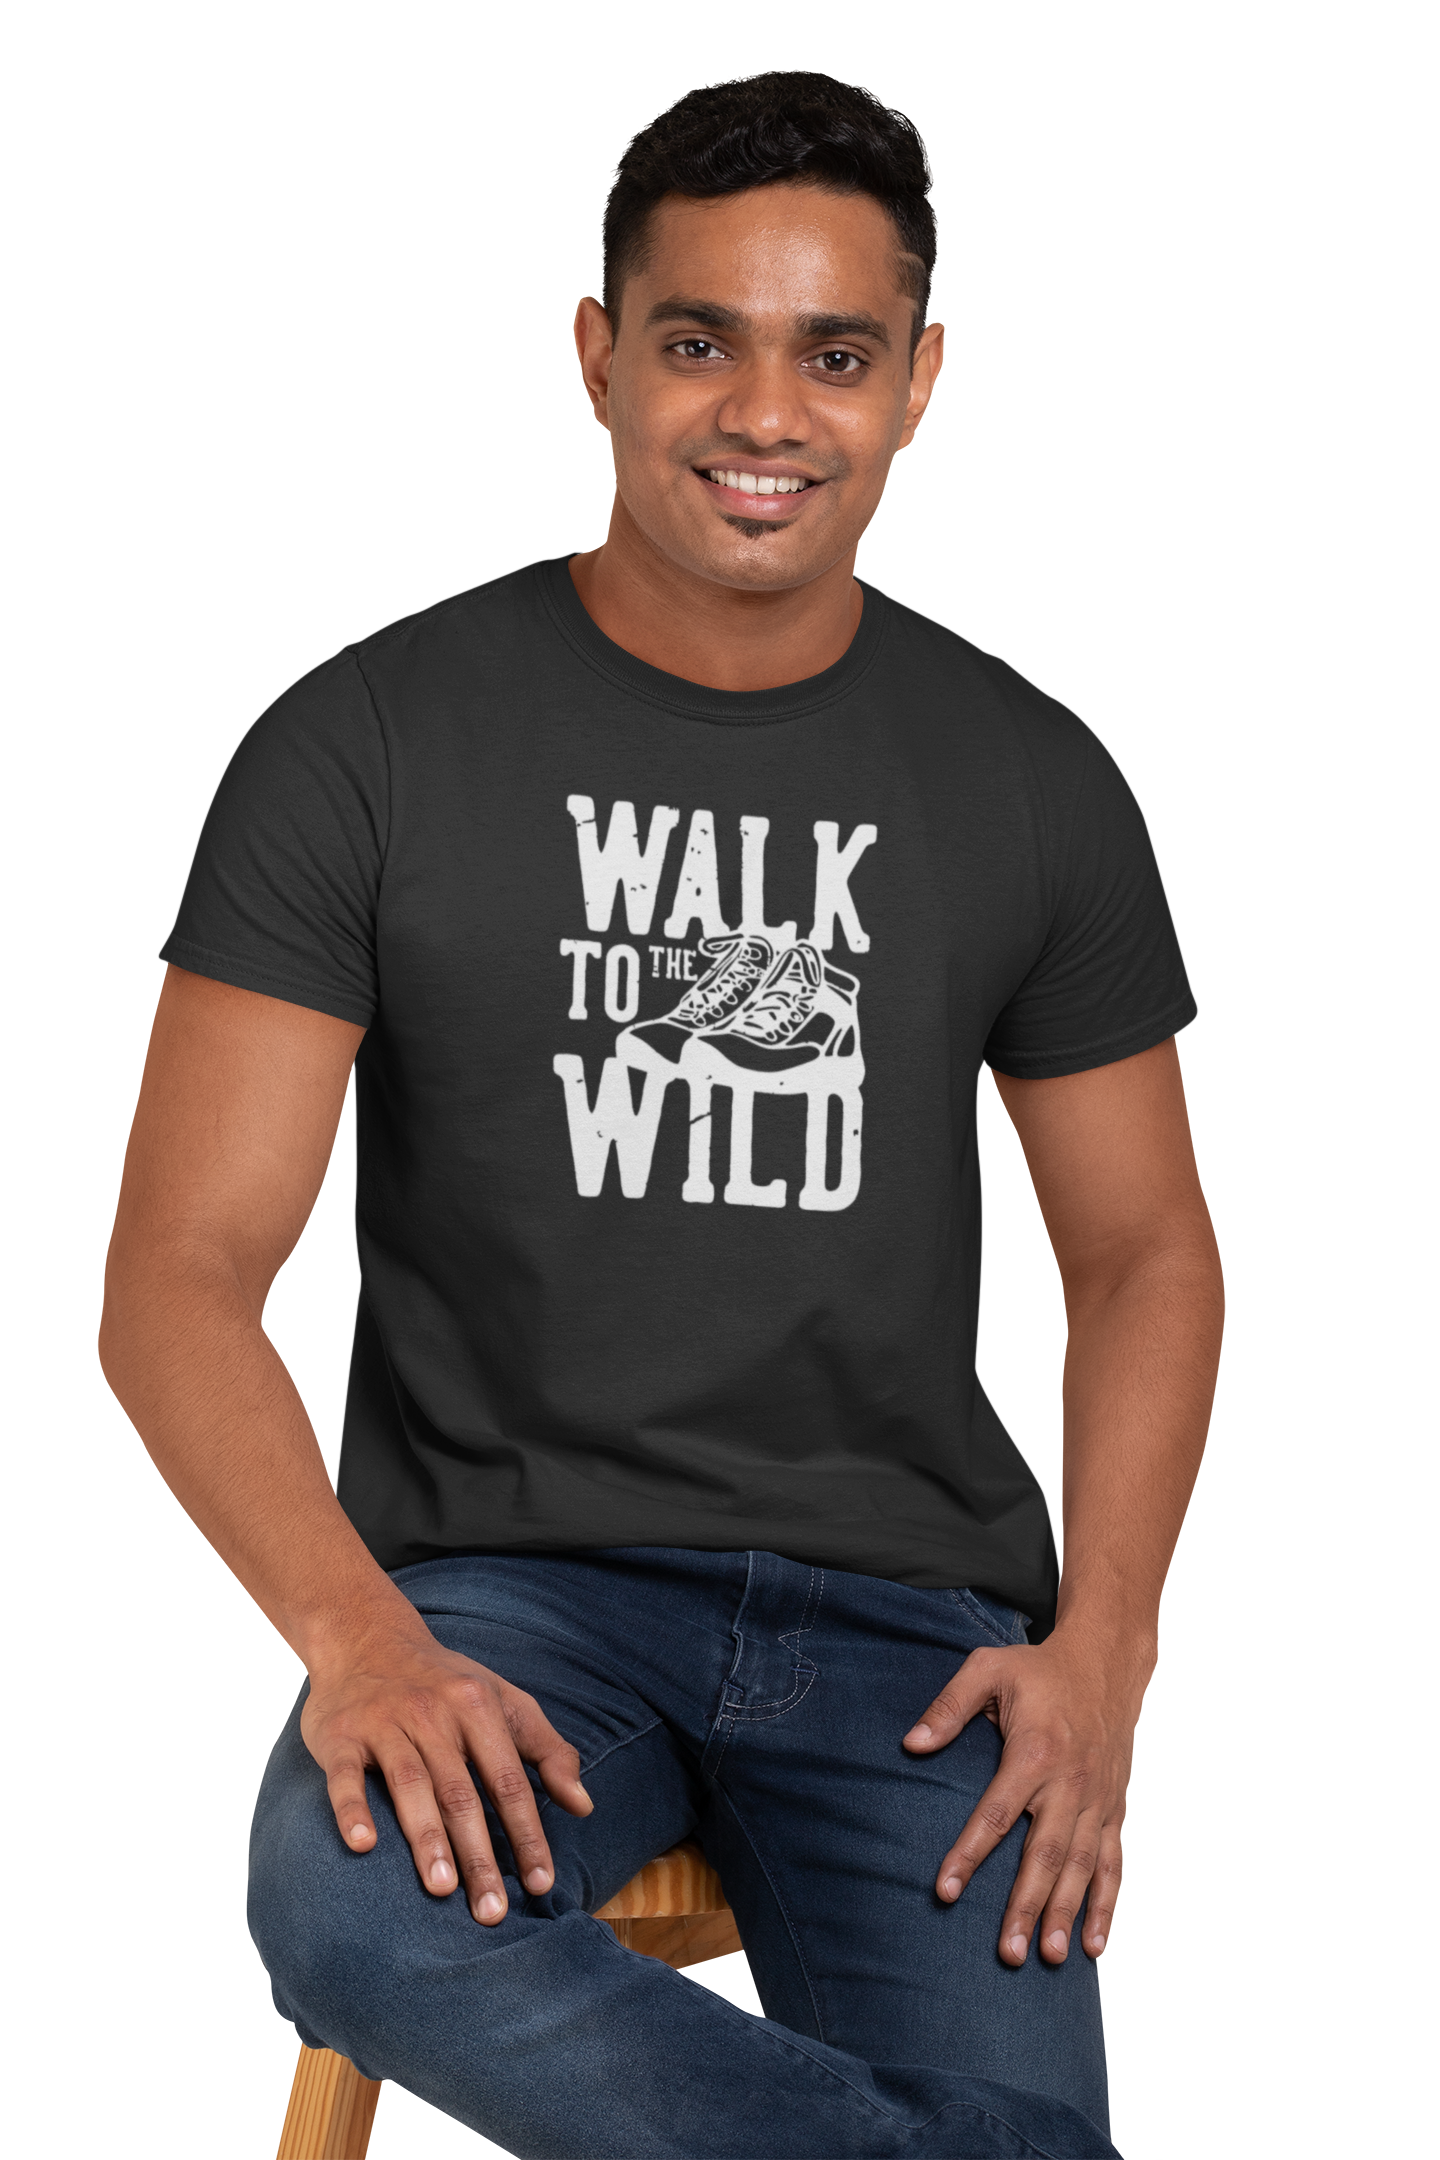 YouWe Fashion "Walk to Wild" Black Cotton T-Shirt for Youth (S-XL)